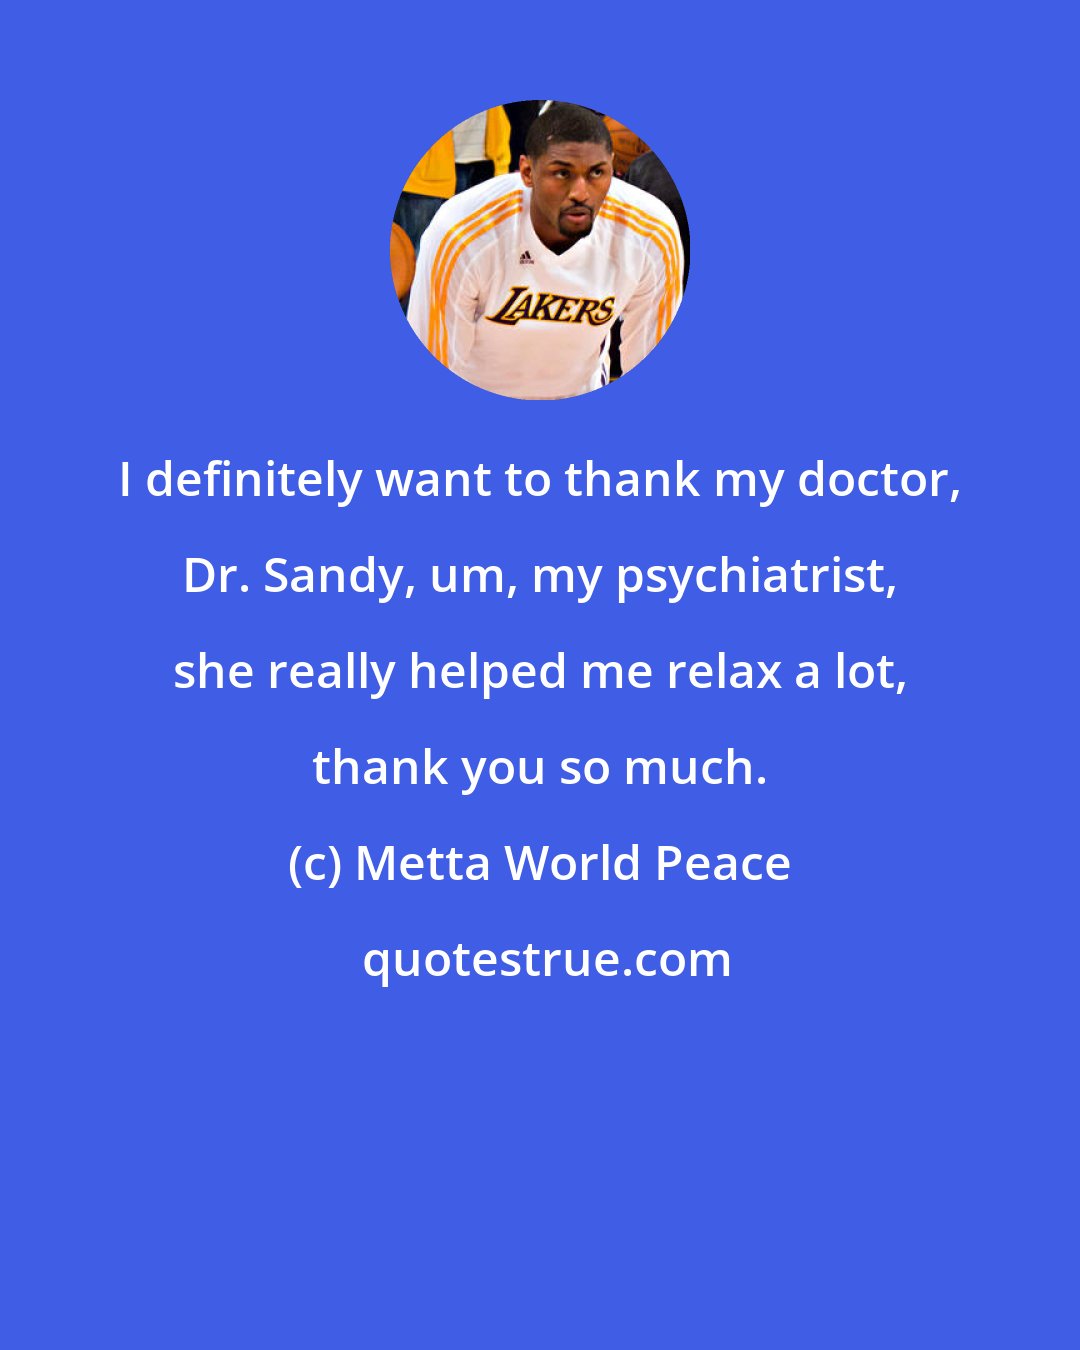 Metta World Peace: I definitely want to thank my doctor, Dr. Sandy, um, my psychiatrist, she really helped me relax a lot, thank you so much.